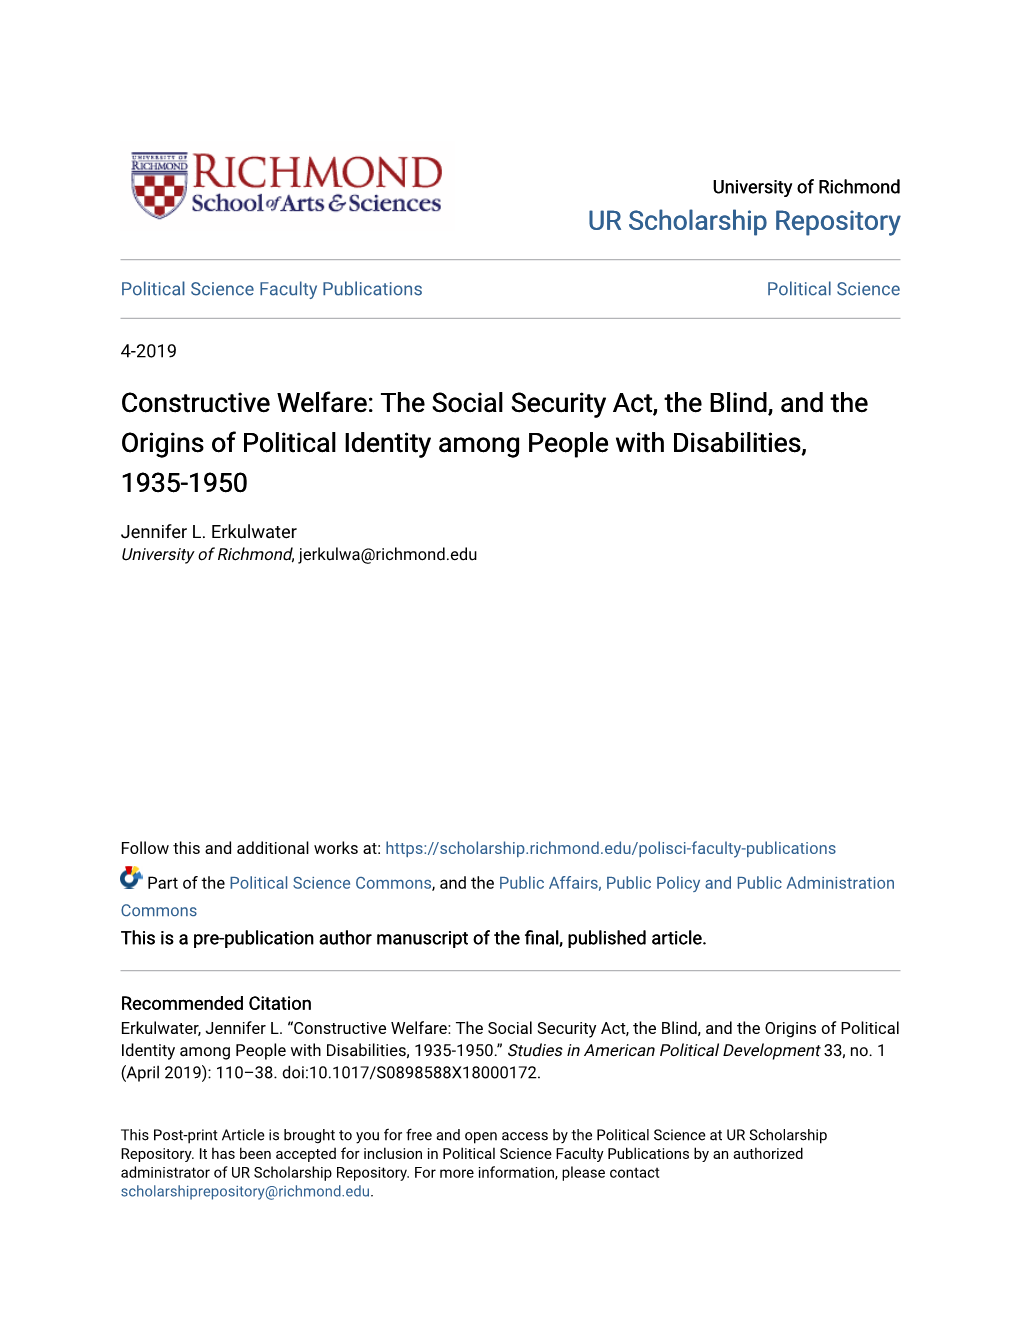 The Social Security Act, the Blind, and the Origins of Political Identity Among People with Disabilities, 1935-1950